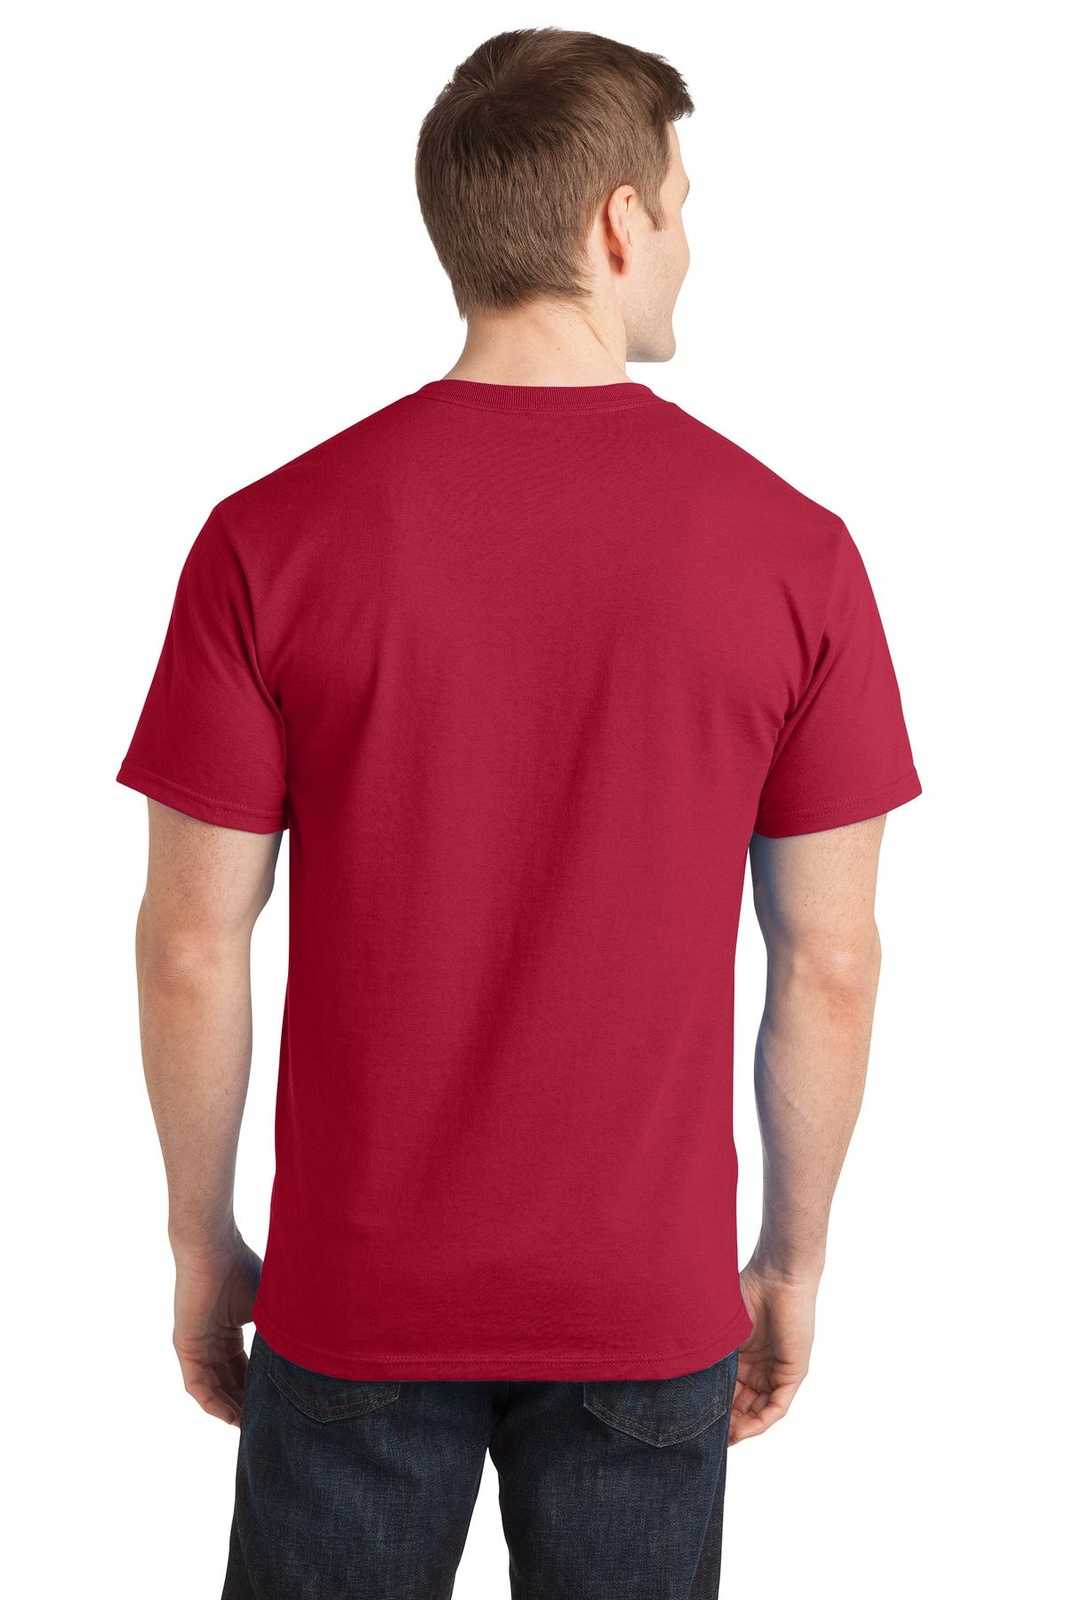 Port & Company PC150 Ring Spun Cotton Tee - Red - HIT a Double - 1